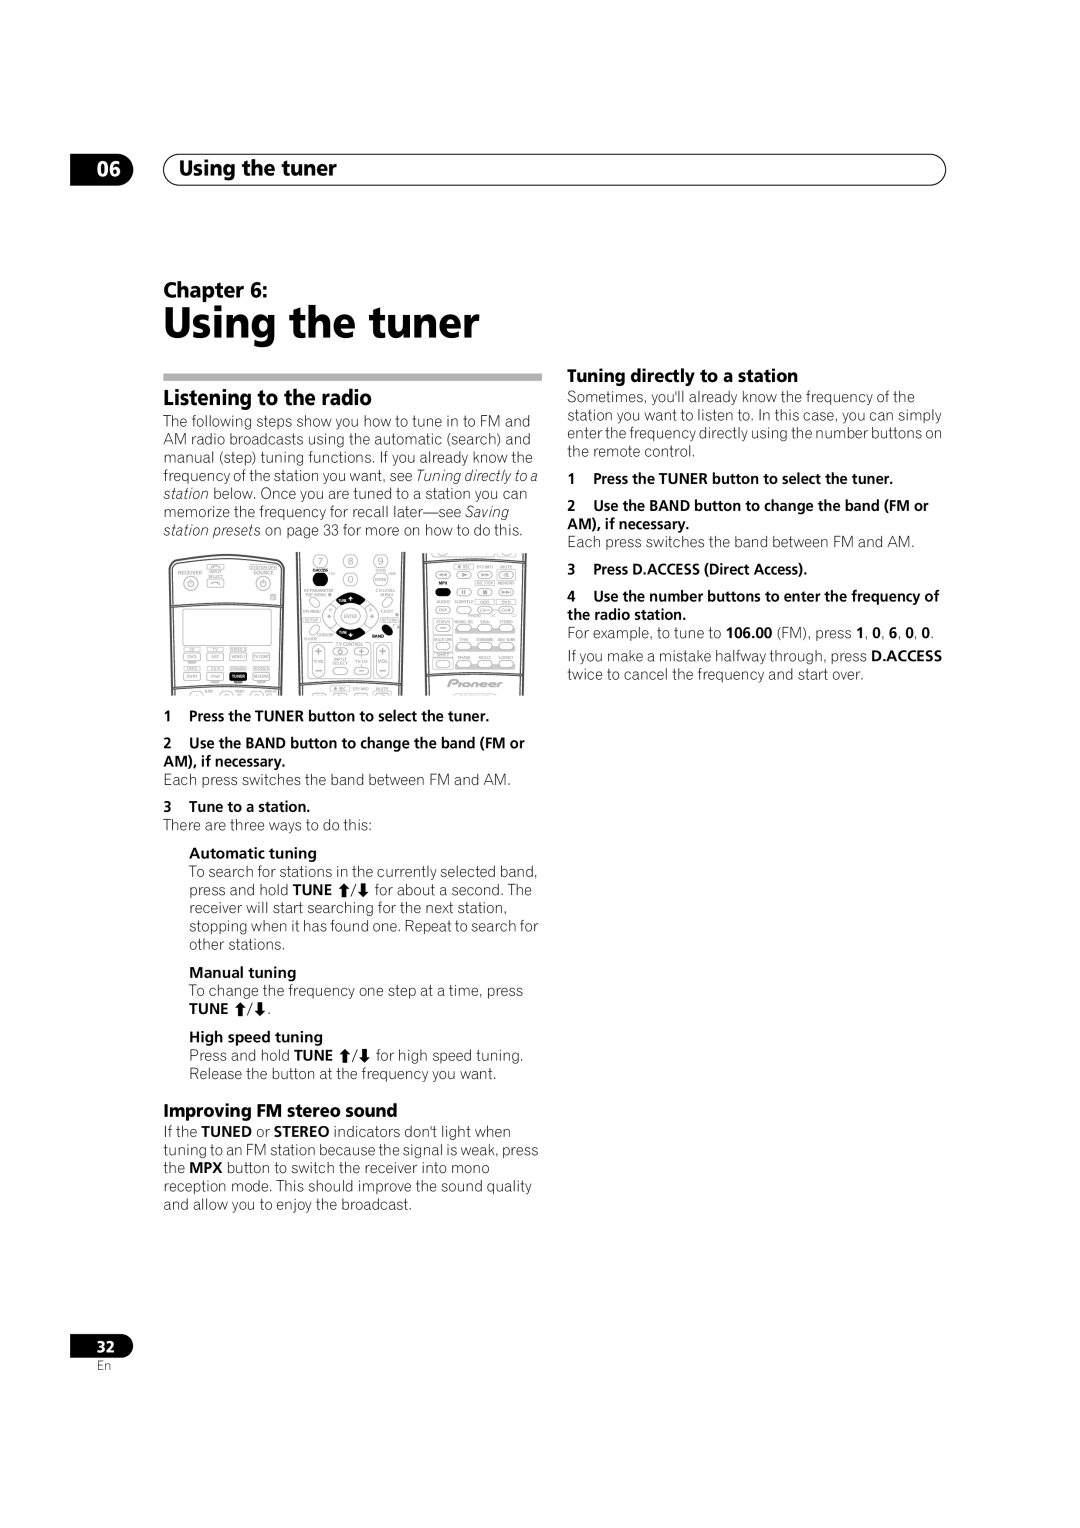 Pioneer VSX-84TXSI manual Using the tuner Chapter, Listening to the radio, Improving FM stereo sound, Tune to a station 